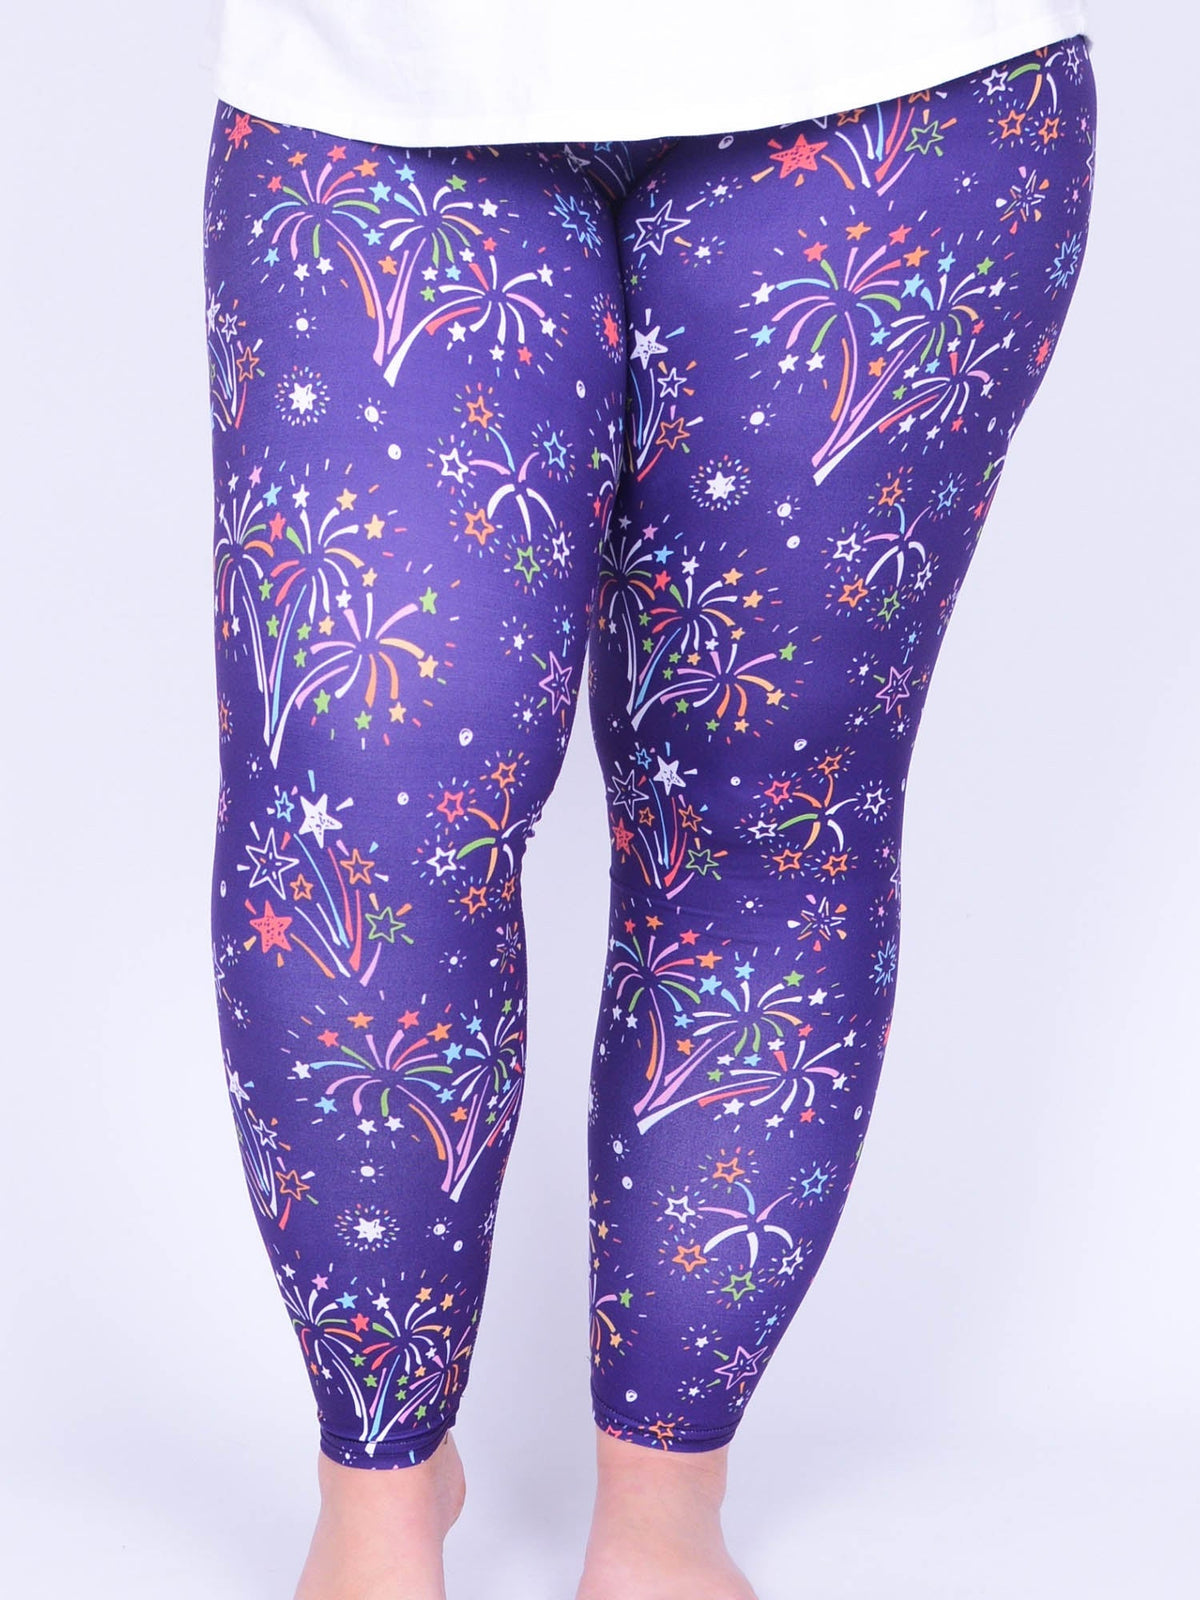 Leggings - Fireworks - L31, Trousers, Pure Plus Clothing, Lagenlook Clothing, Plus Size Fashion, Over 50 Fashion